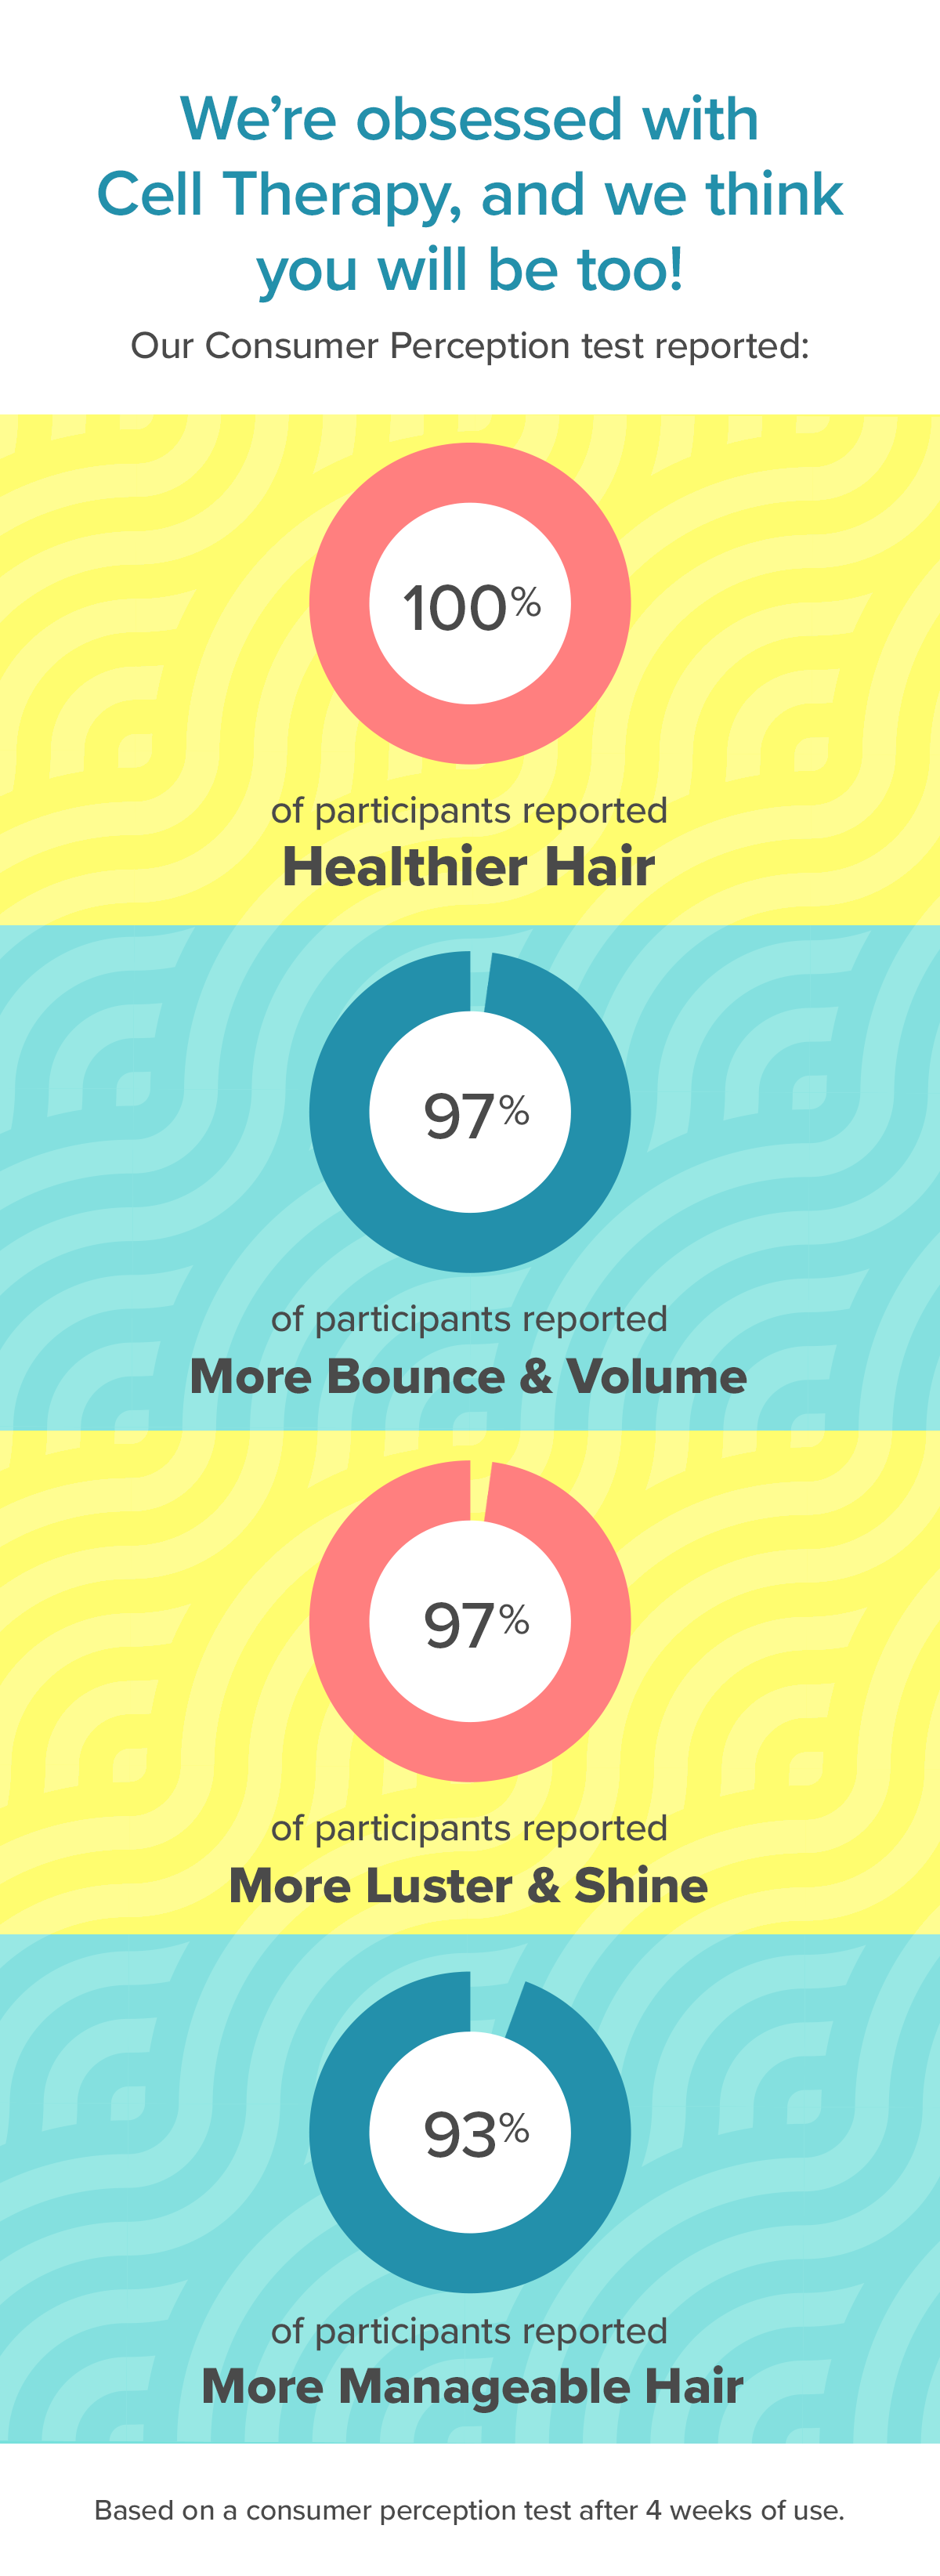 We're obsessed with Cell Therapy, and we think you will be too! Our Consumer Perception test reported: 100% of participants reported Healthier Hair 97% C of participants reported More Bounce Volume 97% C of participants reported More Luster Shine 93% C of participants reported More Manageable Hair Based on a consumer perception test after 4 weeks of use. 